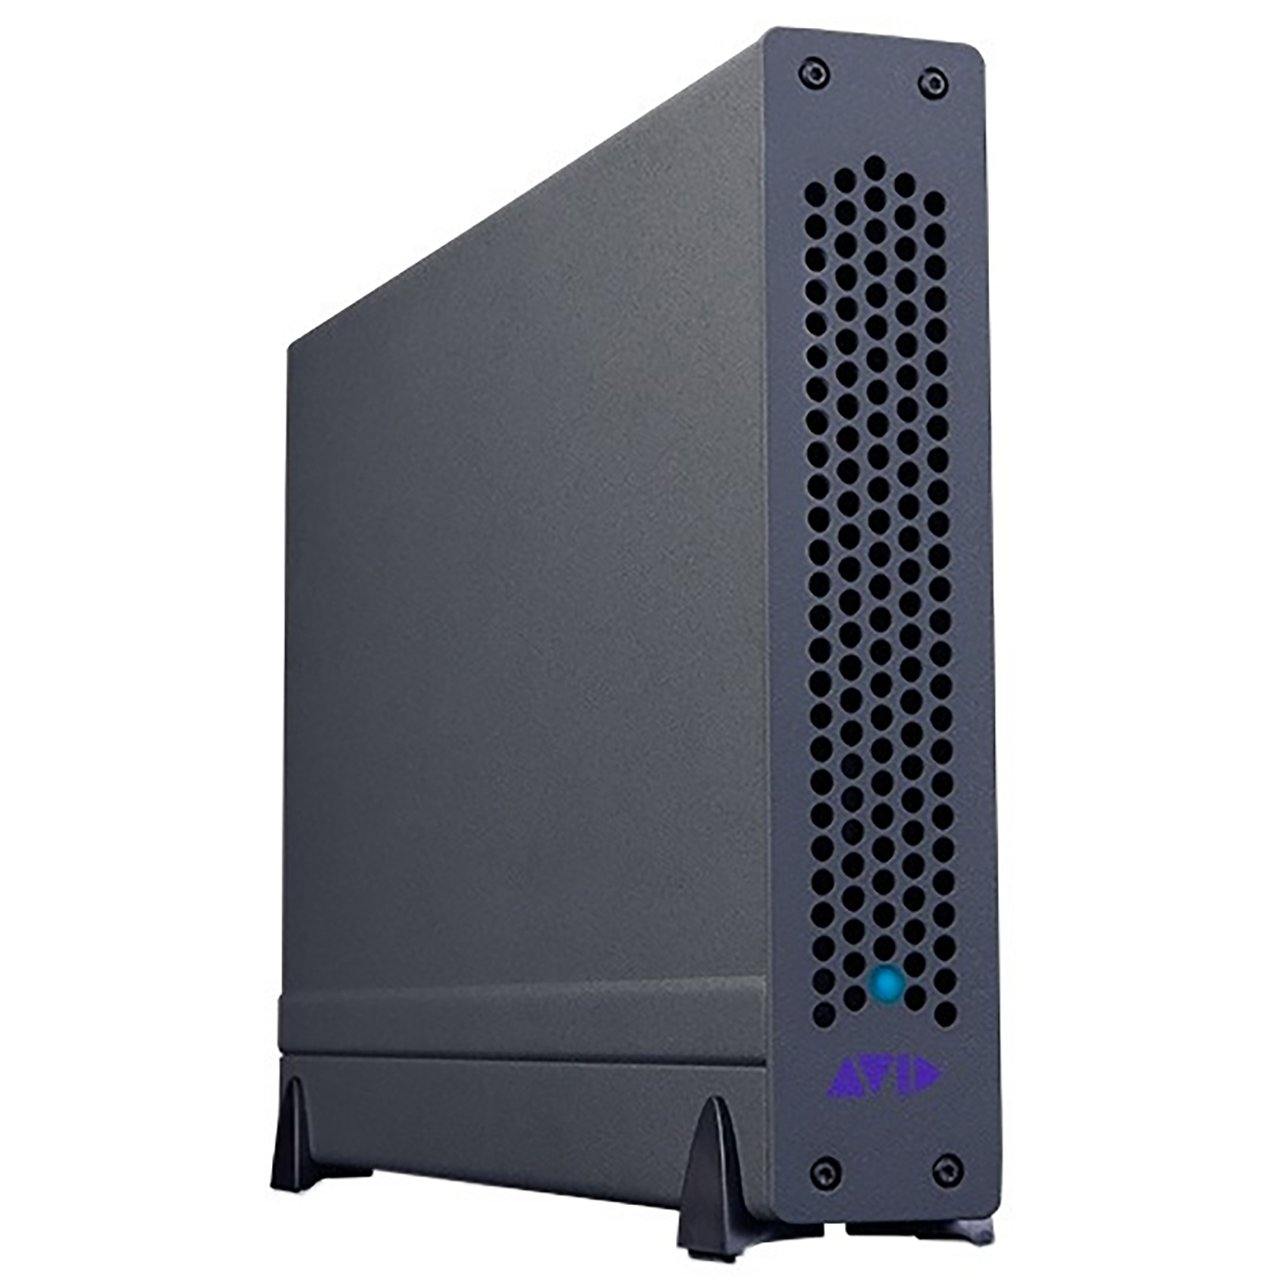 Avid HDX Thunderbolt 3 Chassis - Arda Suppliers